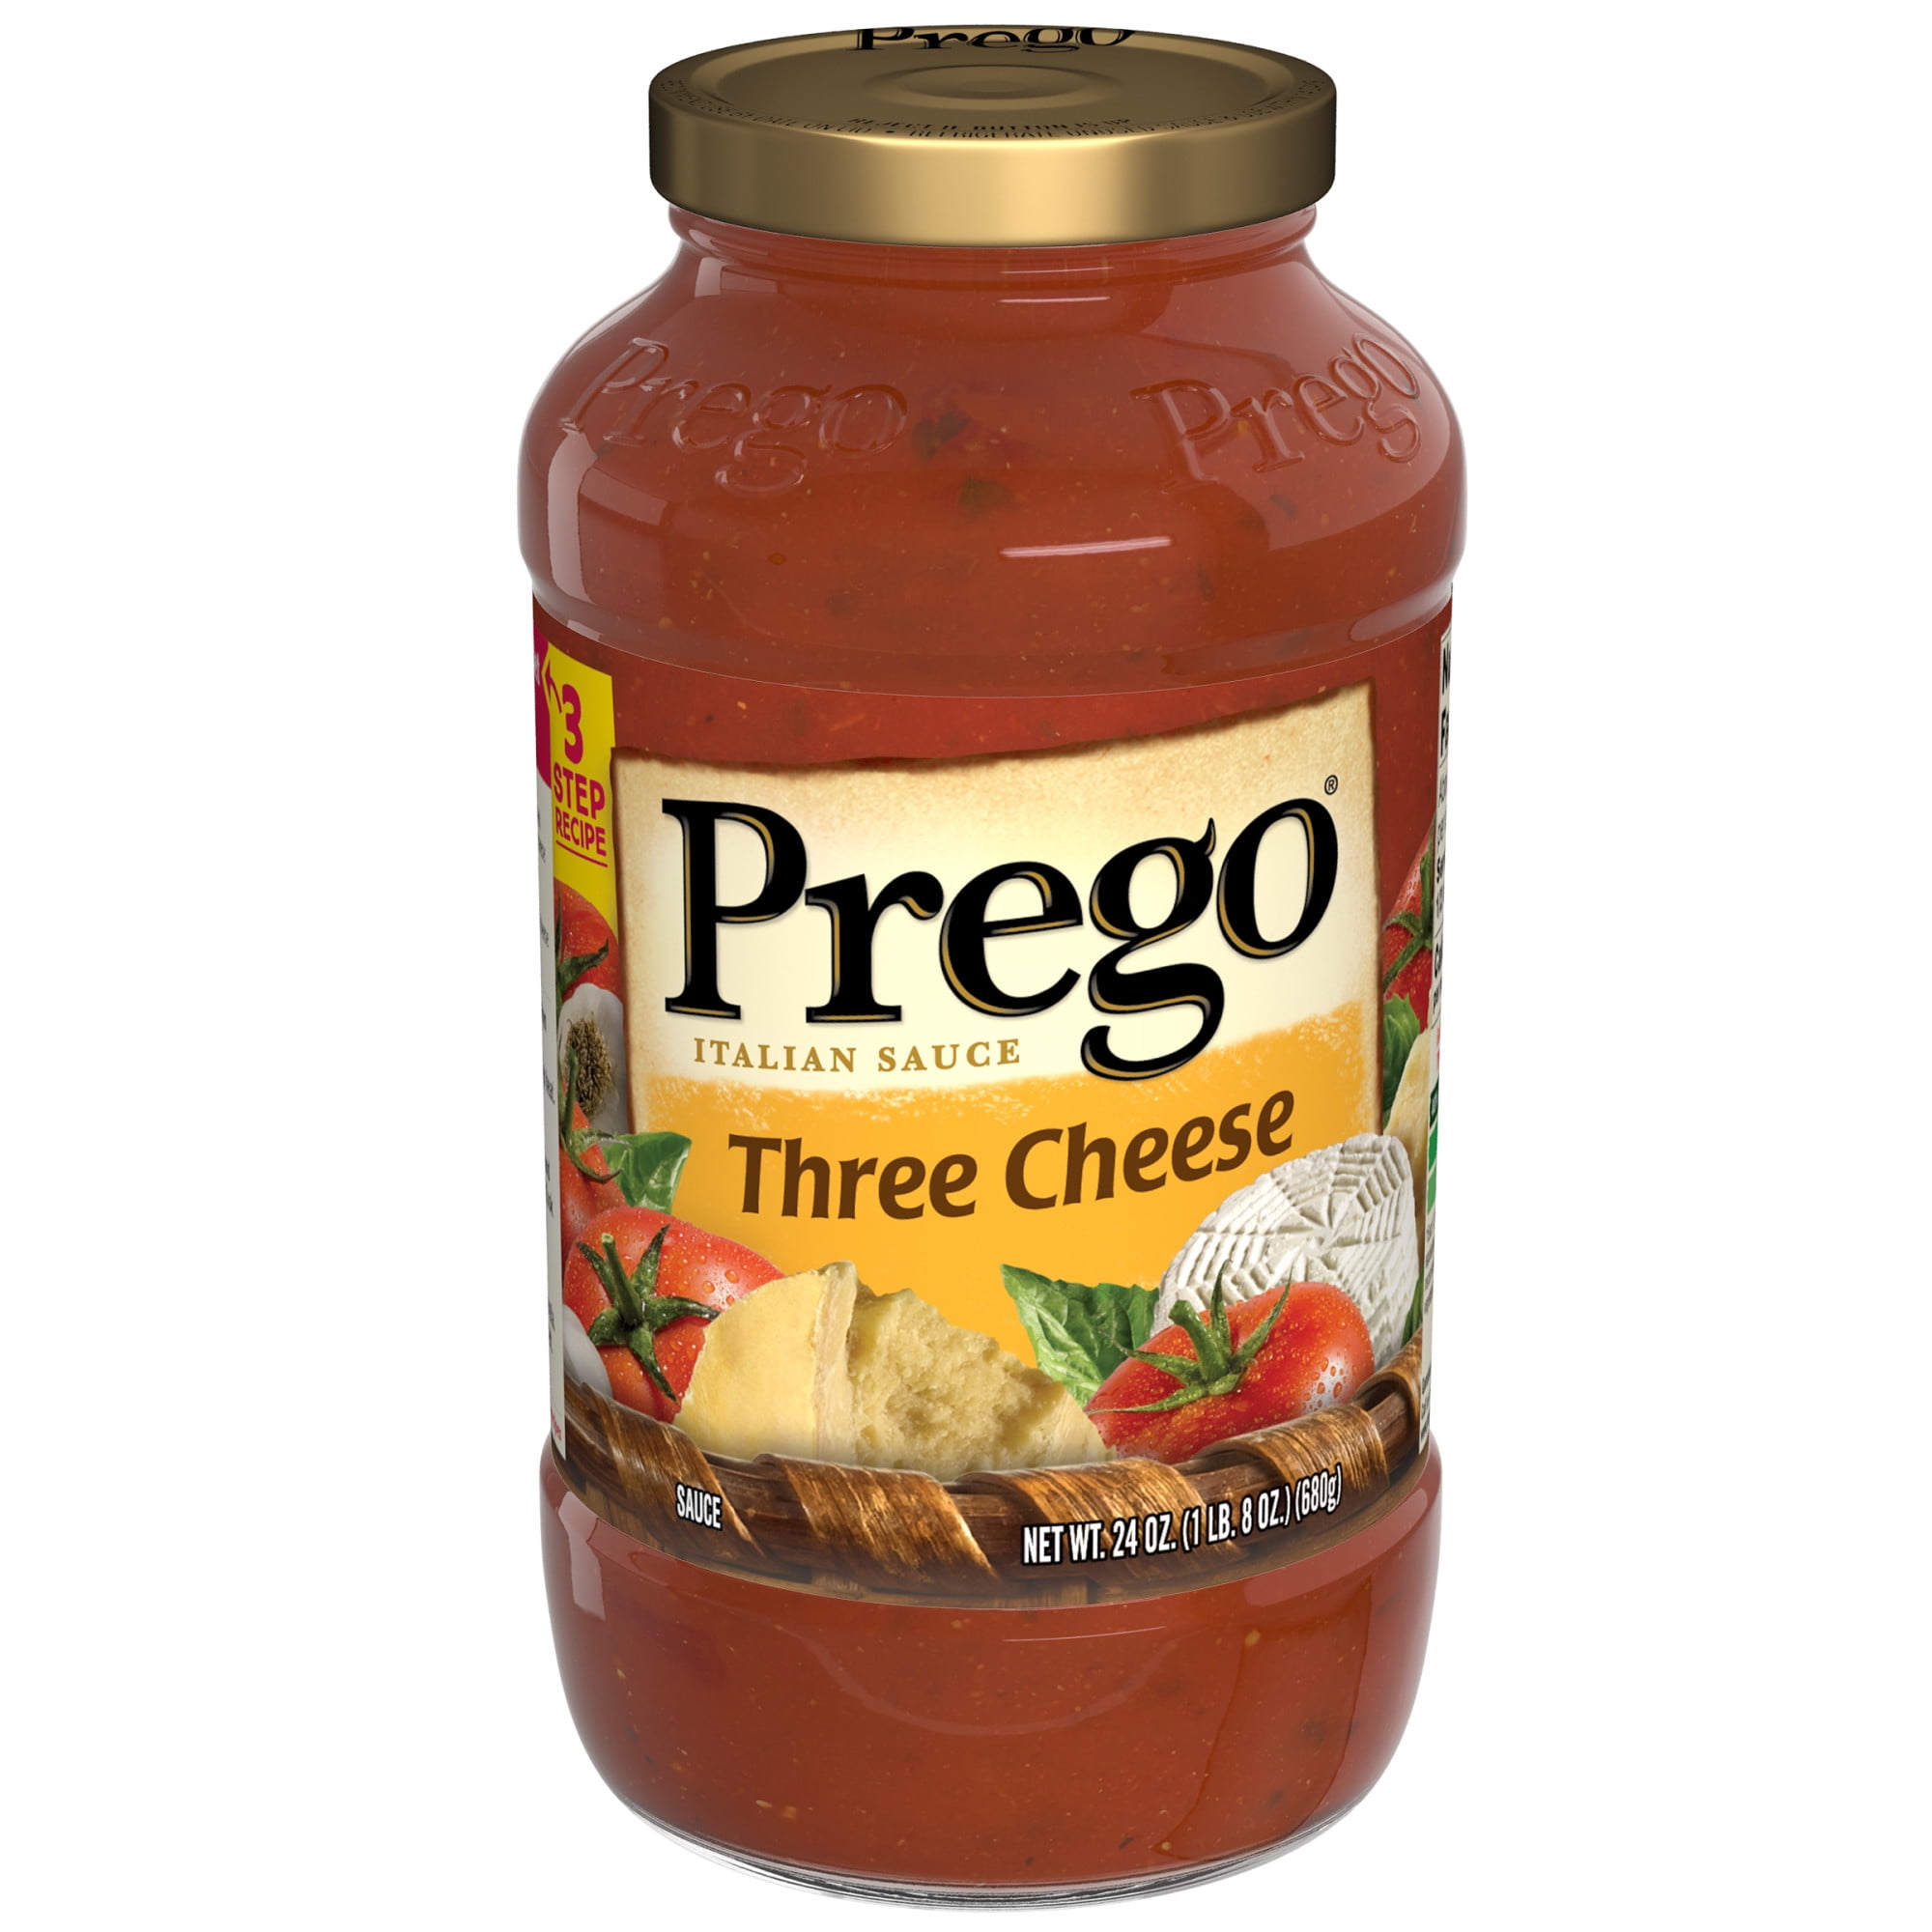 Prego cheese and herbs recipe